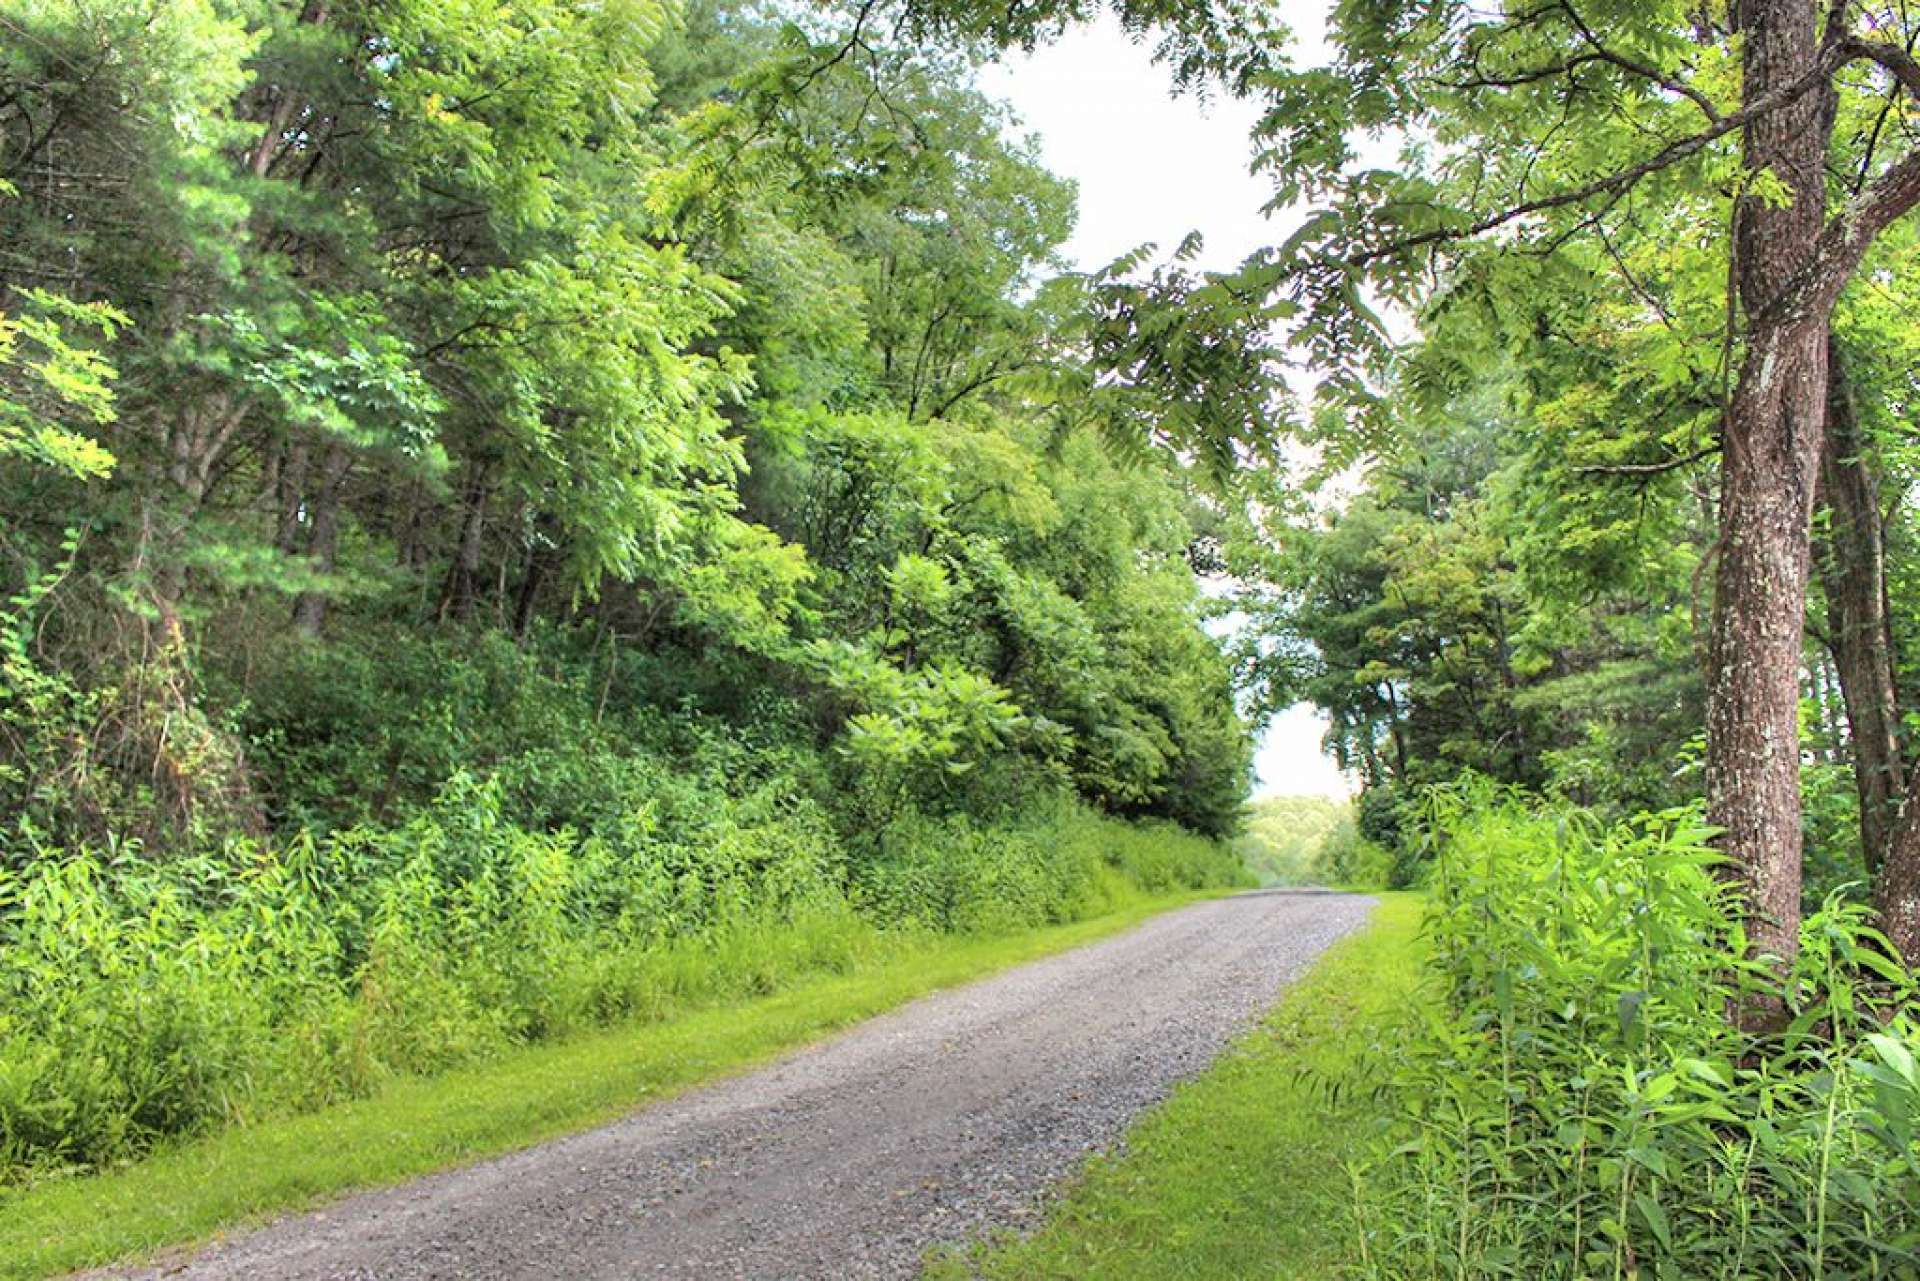 The Preserve on the New River offers well maintained private gravel roads. The land is accessible from either Mouth of Silas Ext. or Haven Ridge Rd.